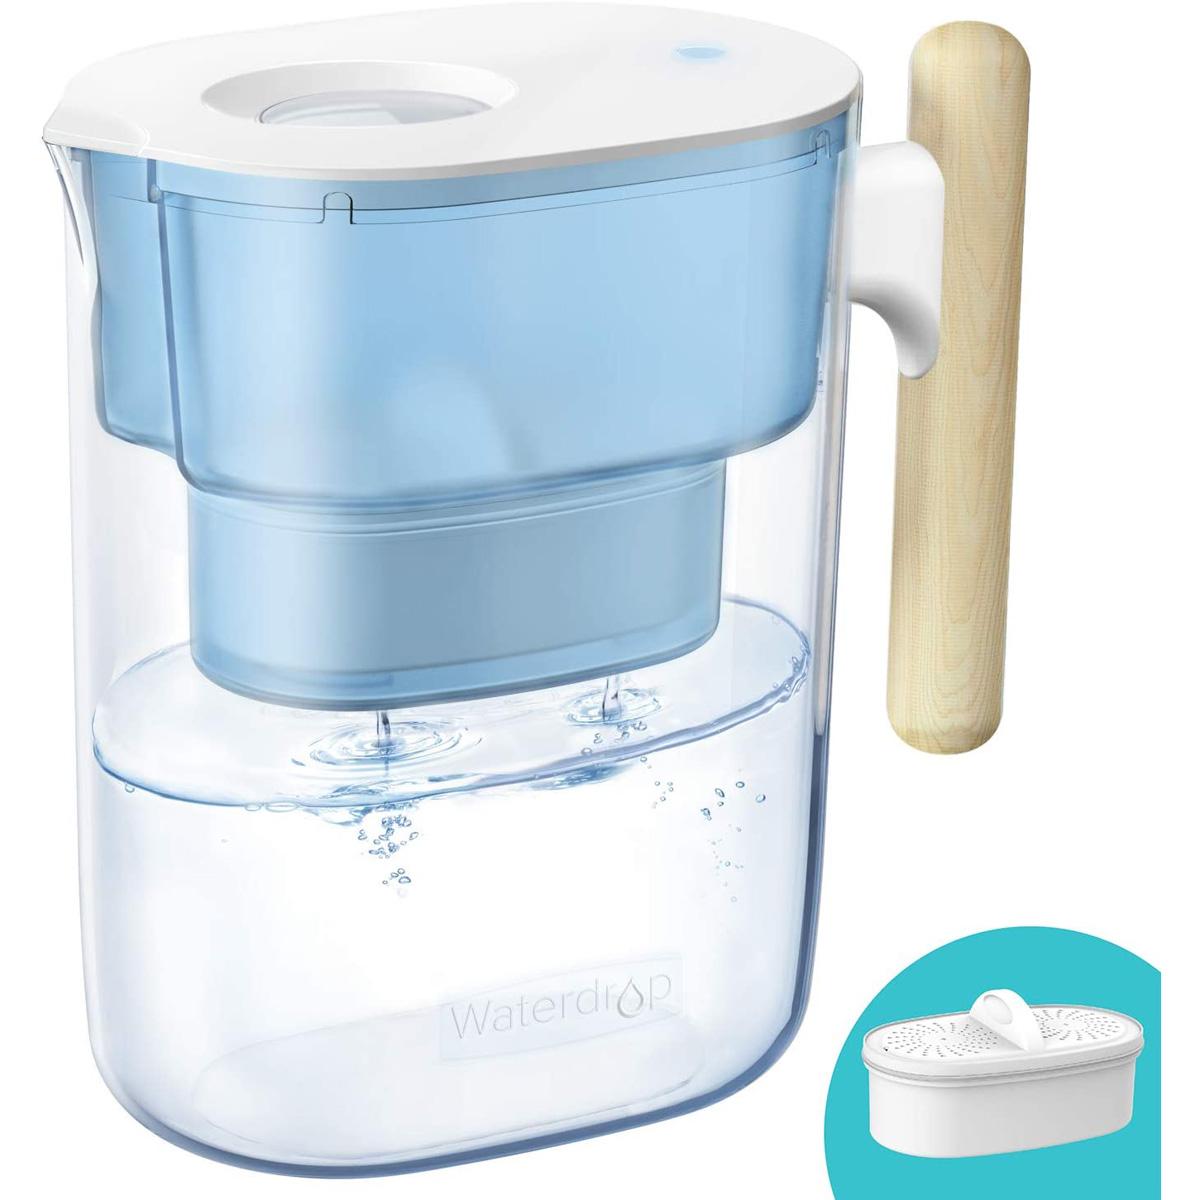 10-Cup Water Filter Pitcher for $23.09